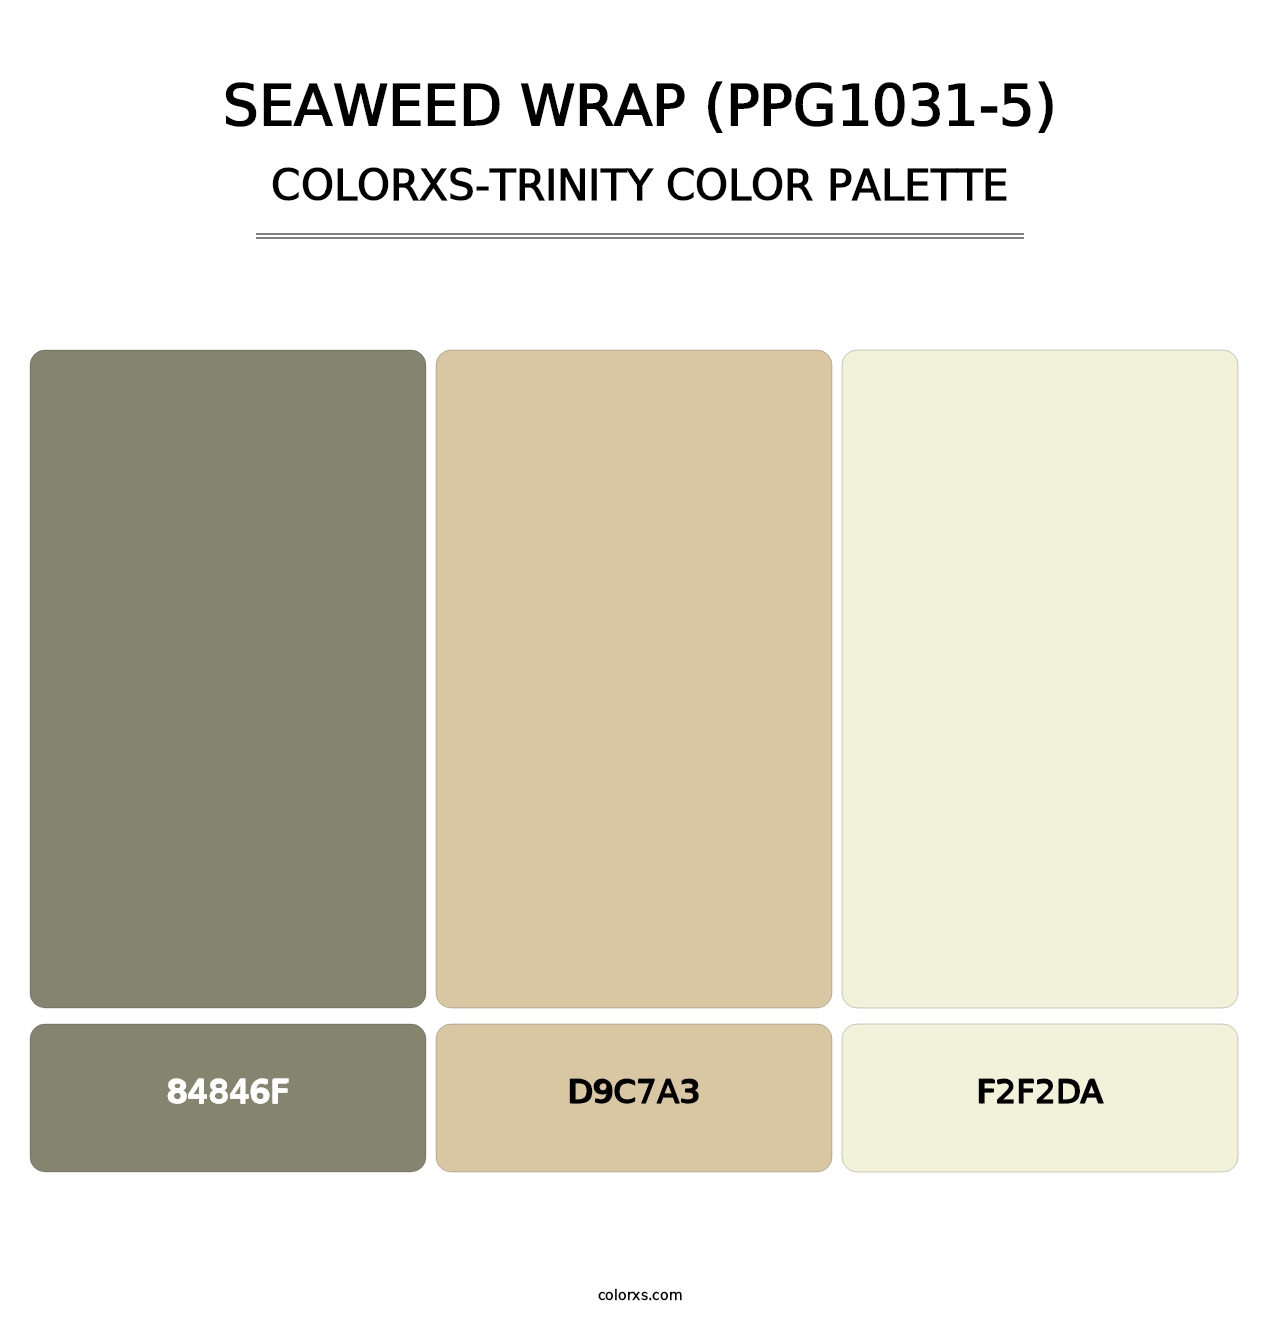 Seaweed Wrap (PPG1031-5) - Colorxs Trinity Palette